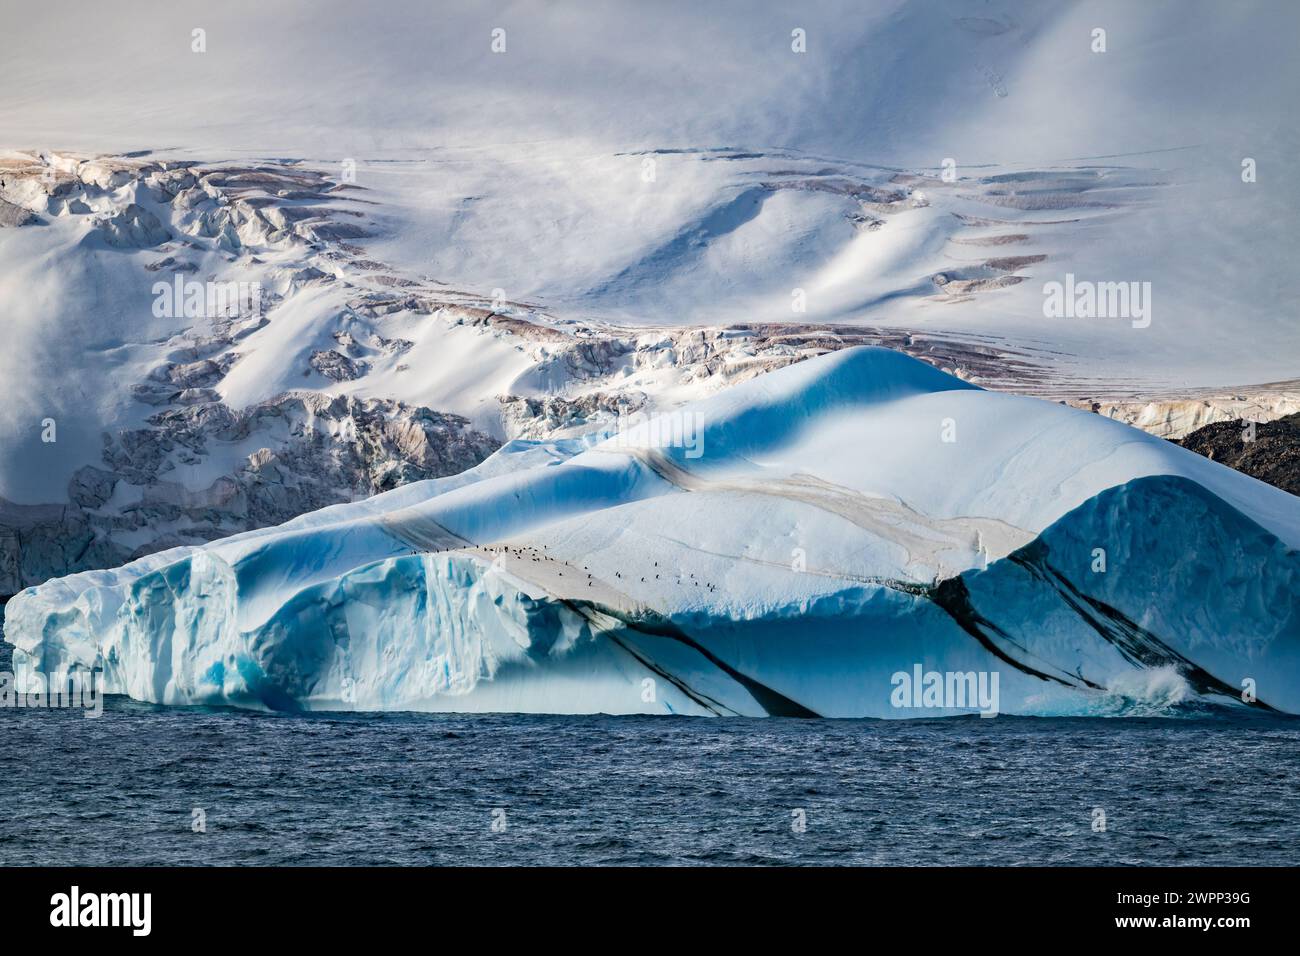 A giant iceberg off the coast of Antarctica, with a group of penguins on it. Stock Photo